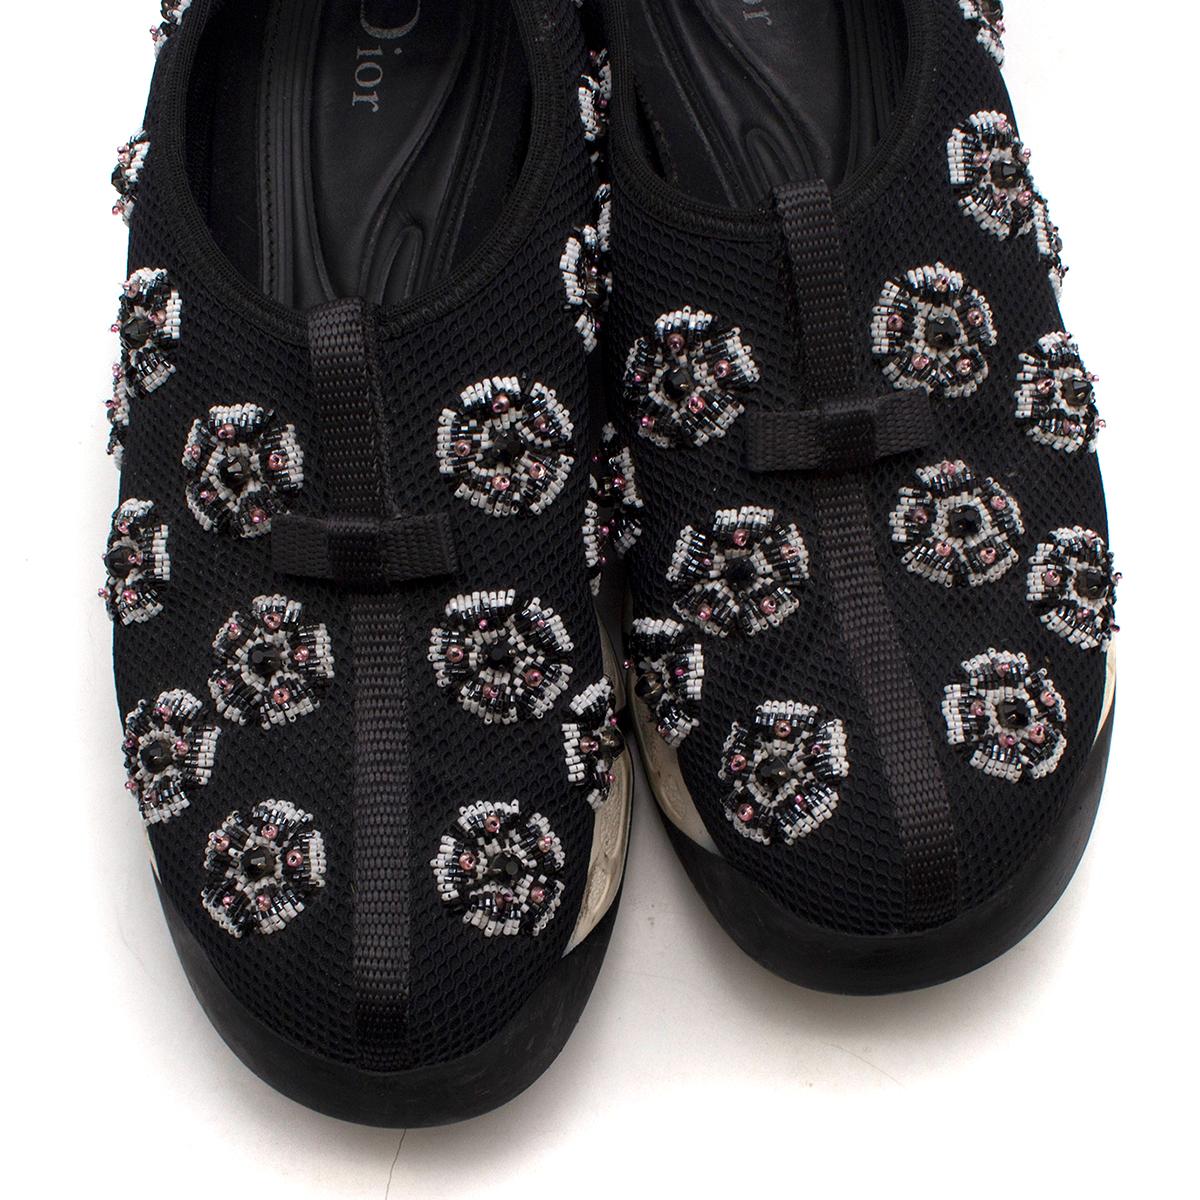 Christian Dior Black Technical Fabric Embellished Slip-on Trainers Size 39 3